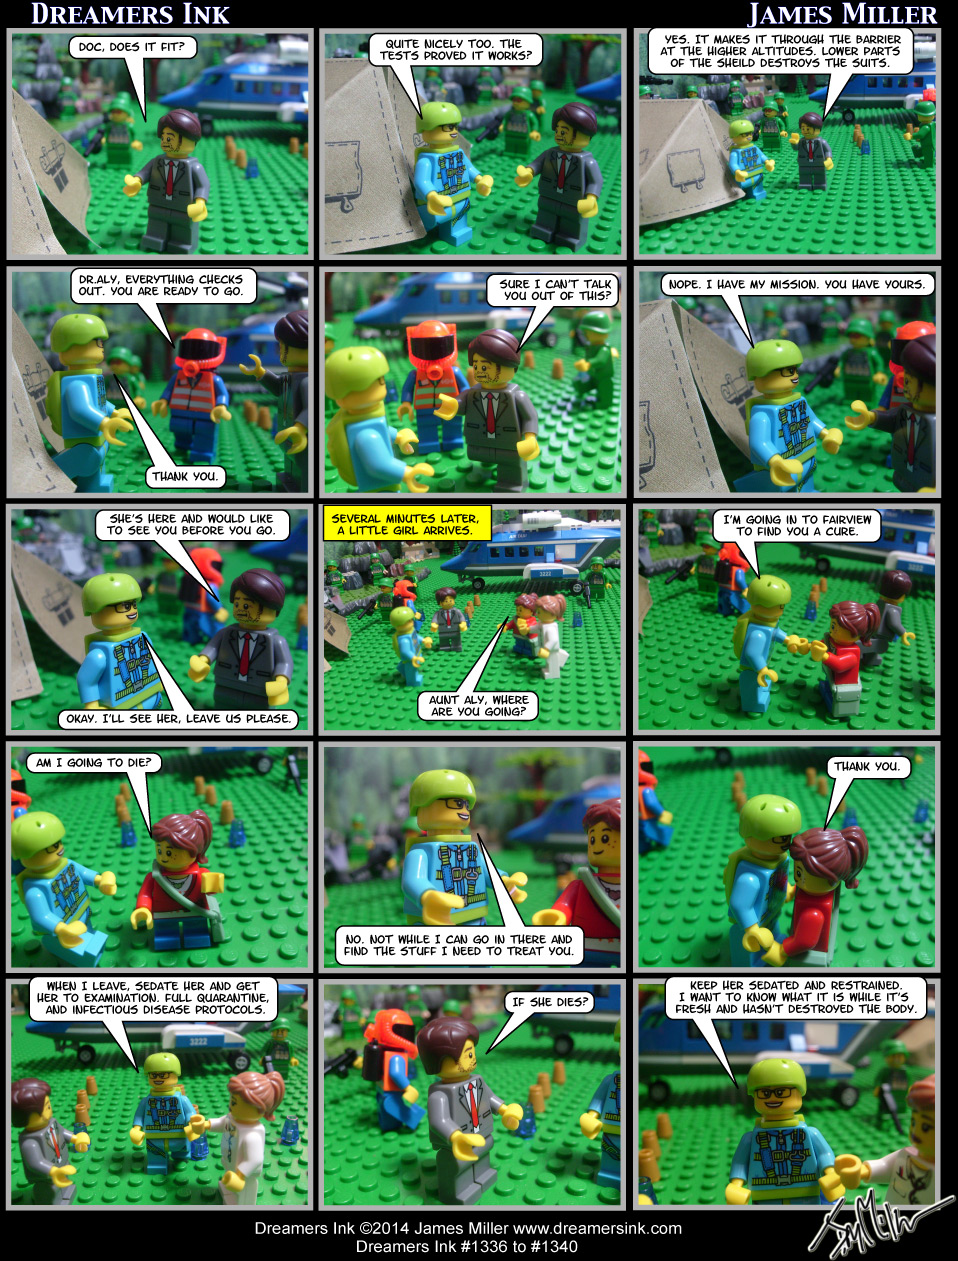 Strips #1336 To #1340